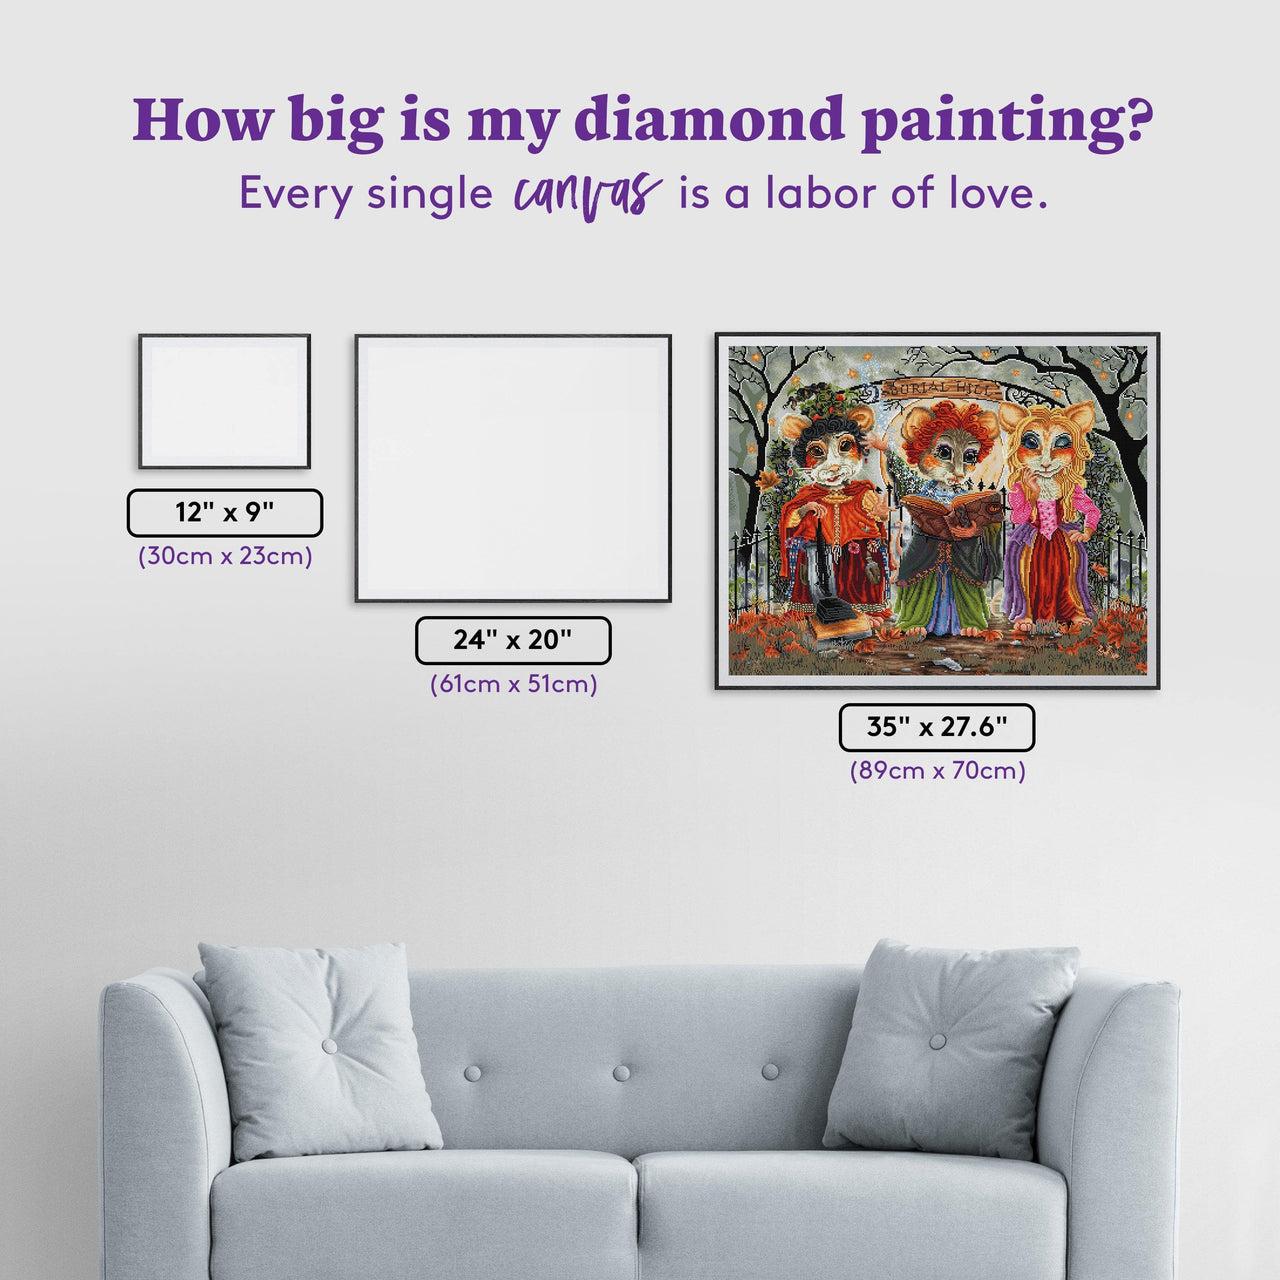 Diamond Painting The Sisters 35" x 27.6" (89cm x 70cm) / Square with 70 Colors including 2 ABs and 2 Fairy Dust Diamonds / 100,317